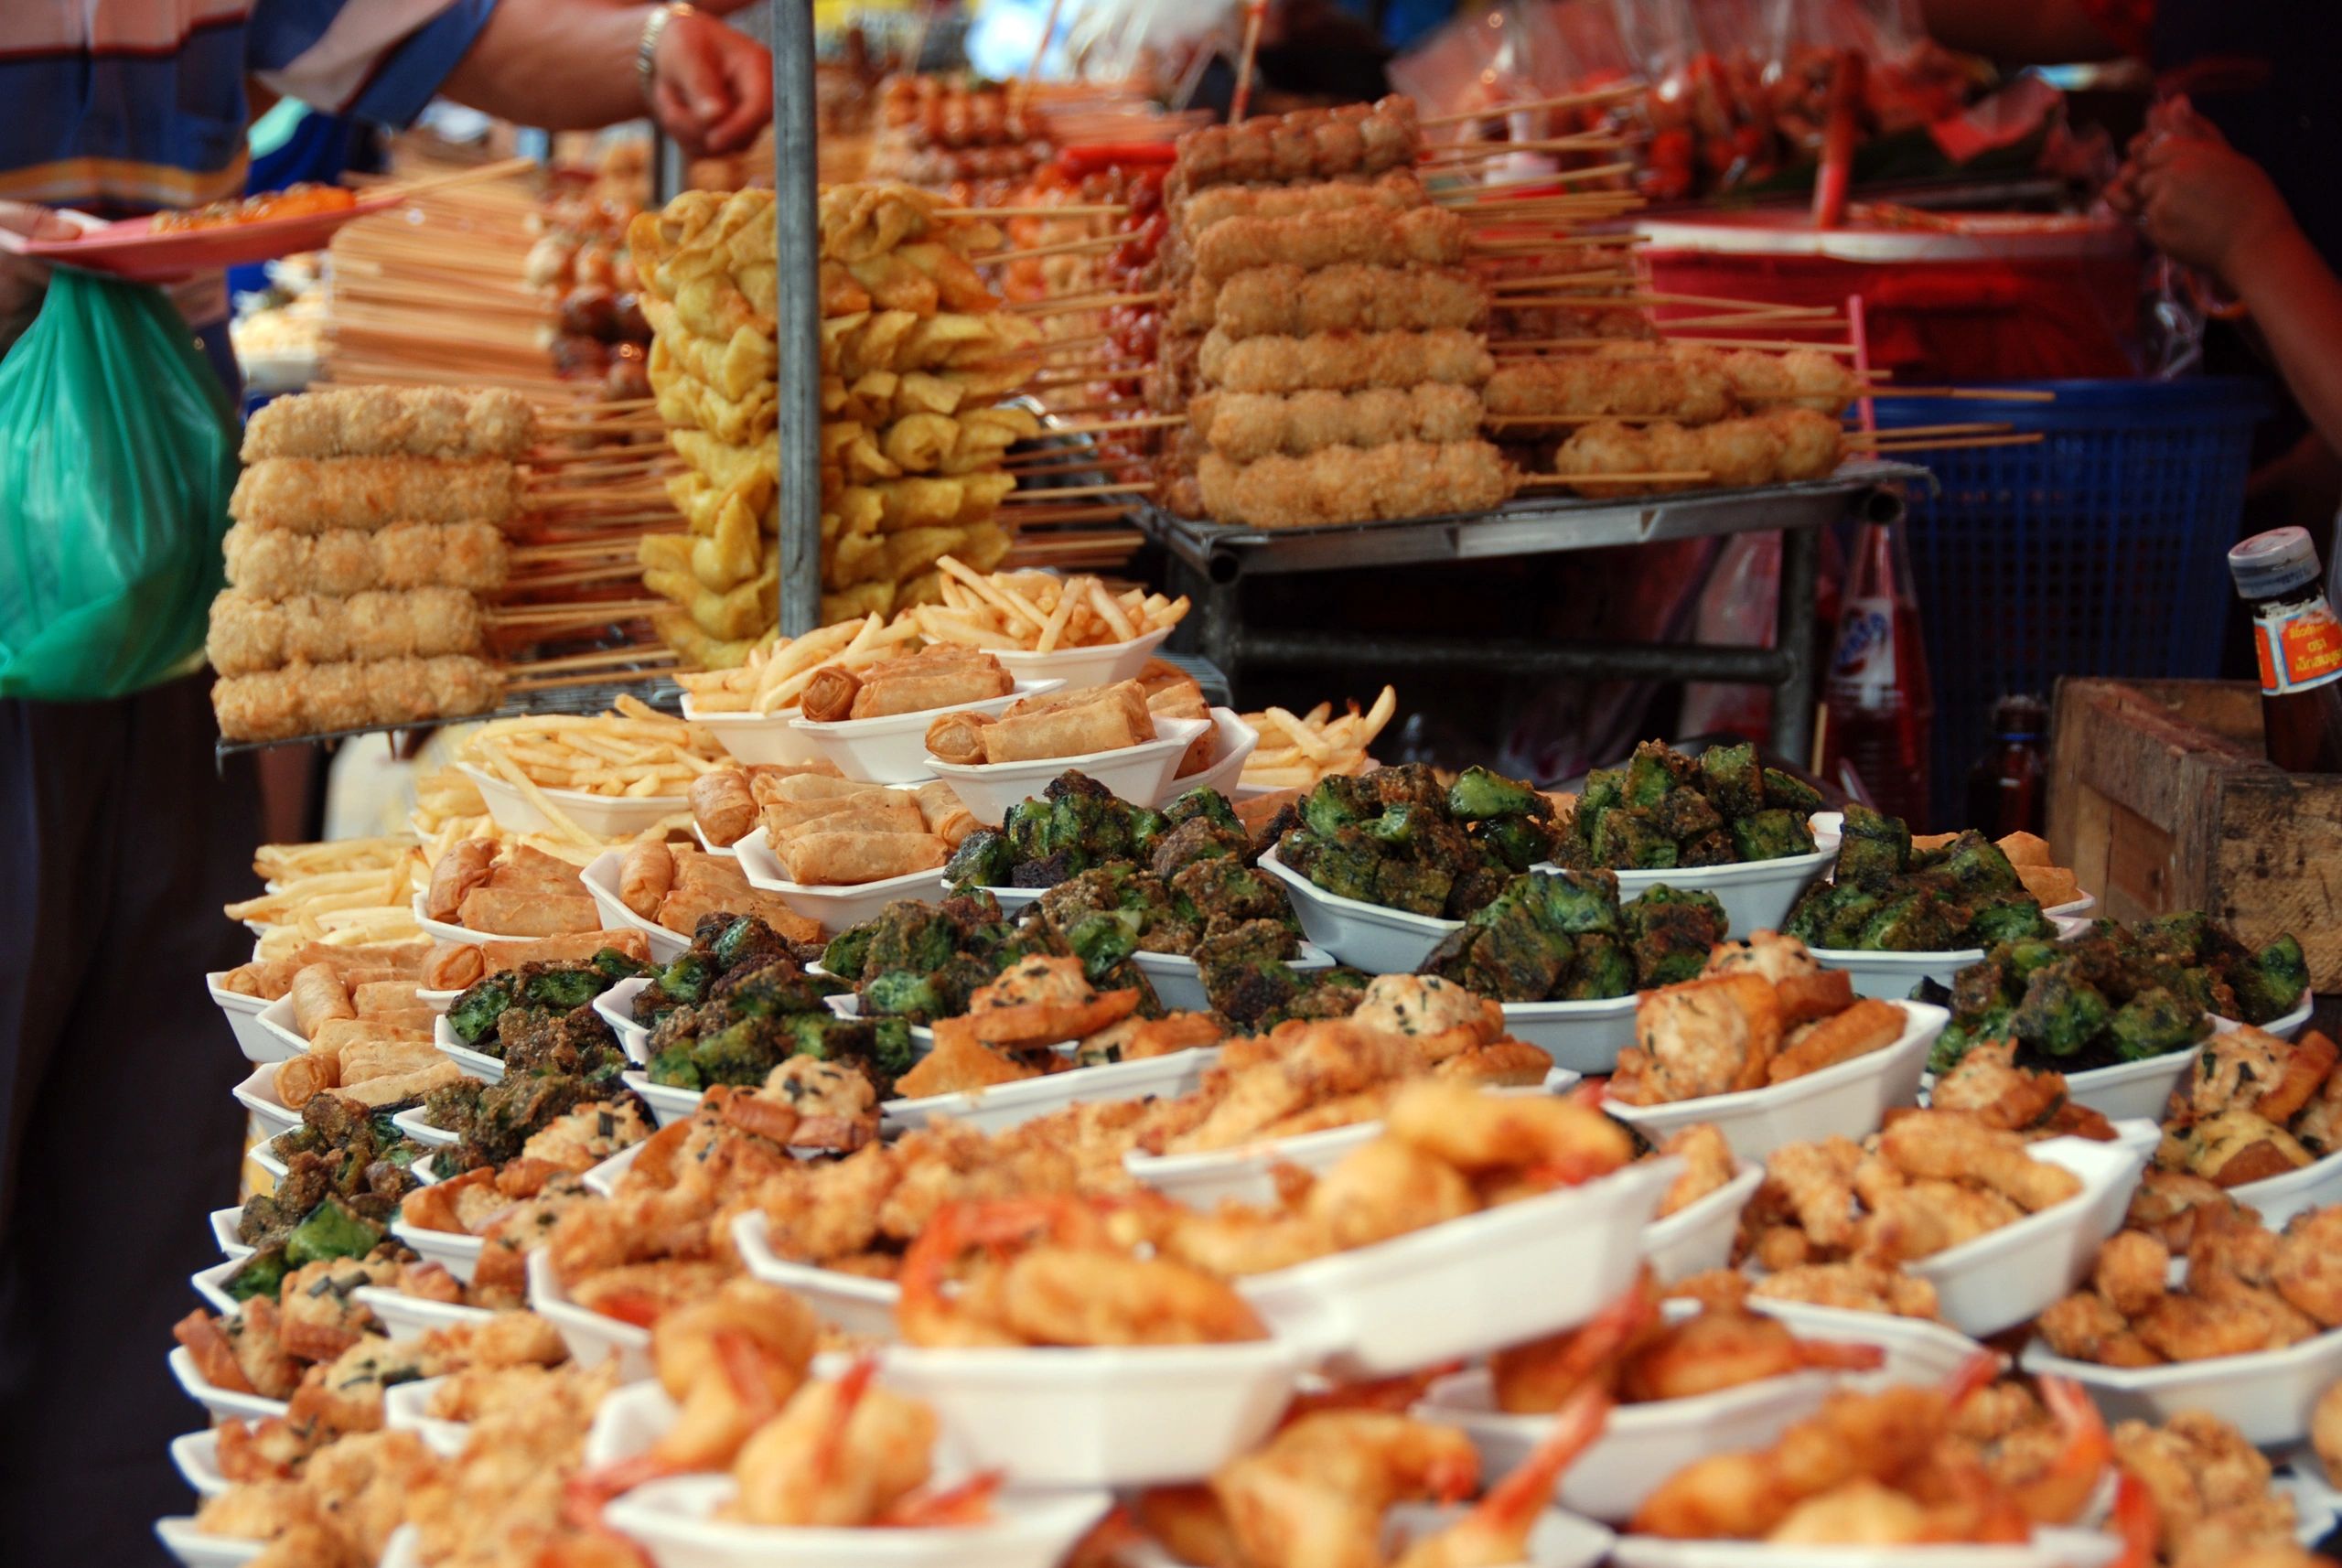 Photo of Thai food at market in Thailand.